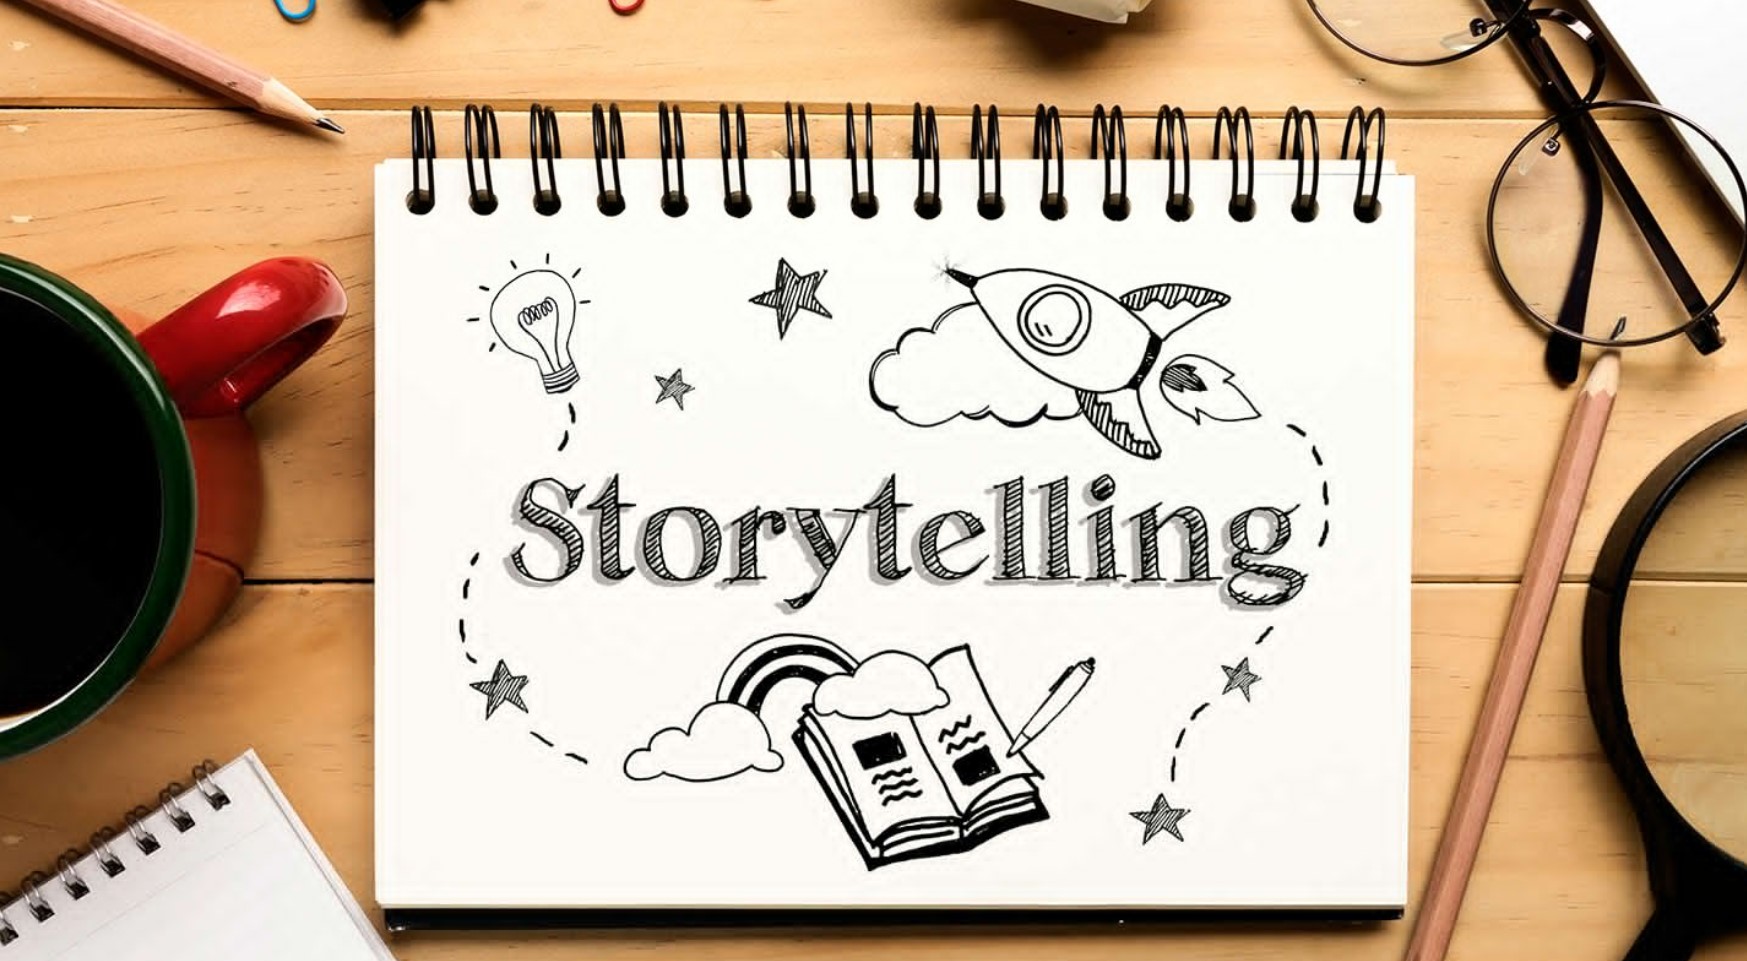 The Art of Storytelling on Instagram: Story Edition